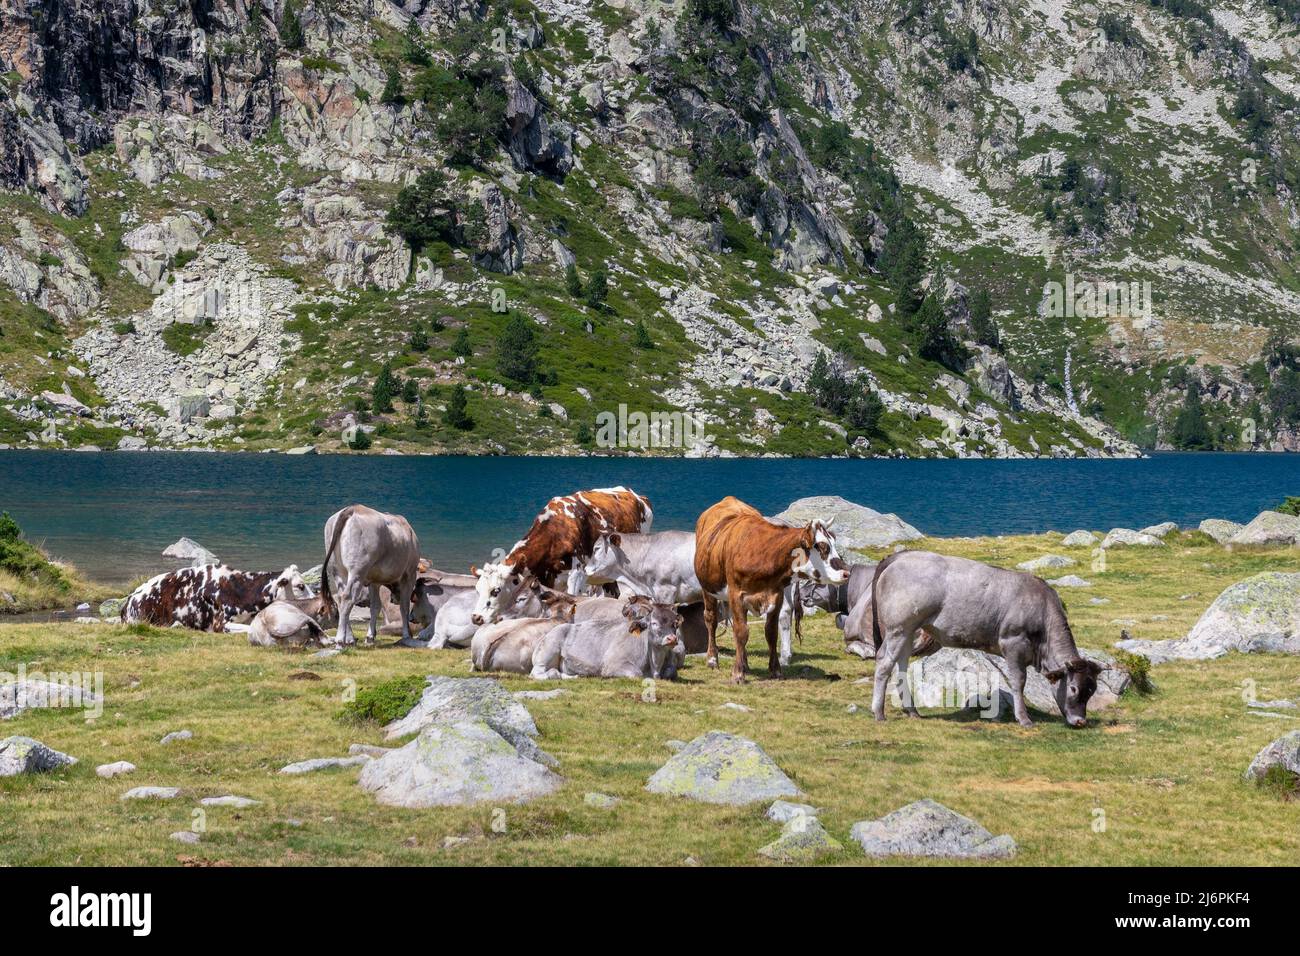 Cows near Aubert lake in Neouvielle nature reserve, Pyrenees national park, France Stock Photo